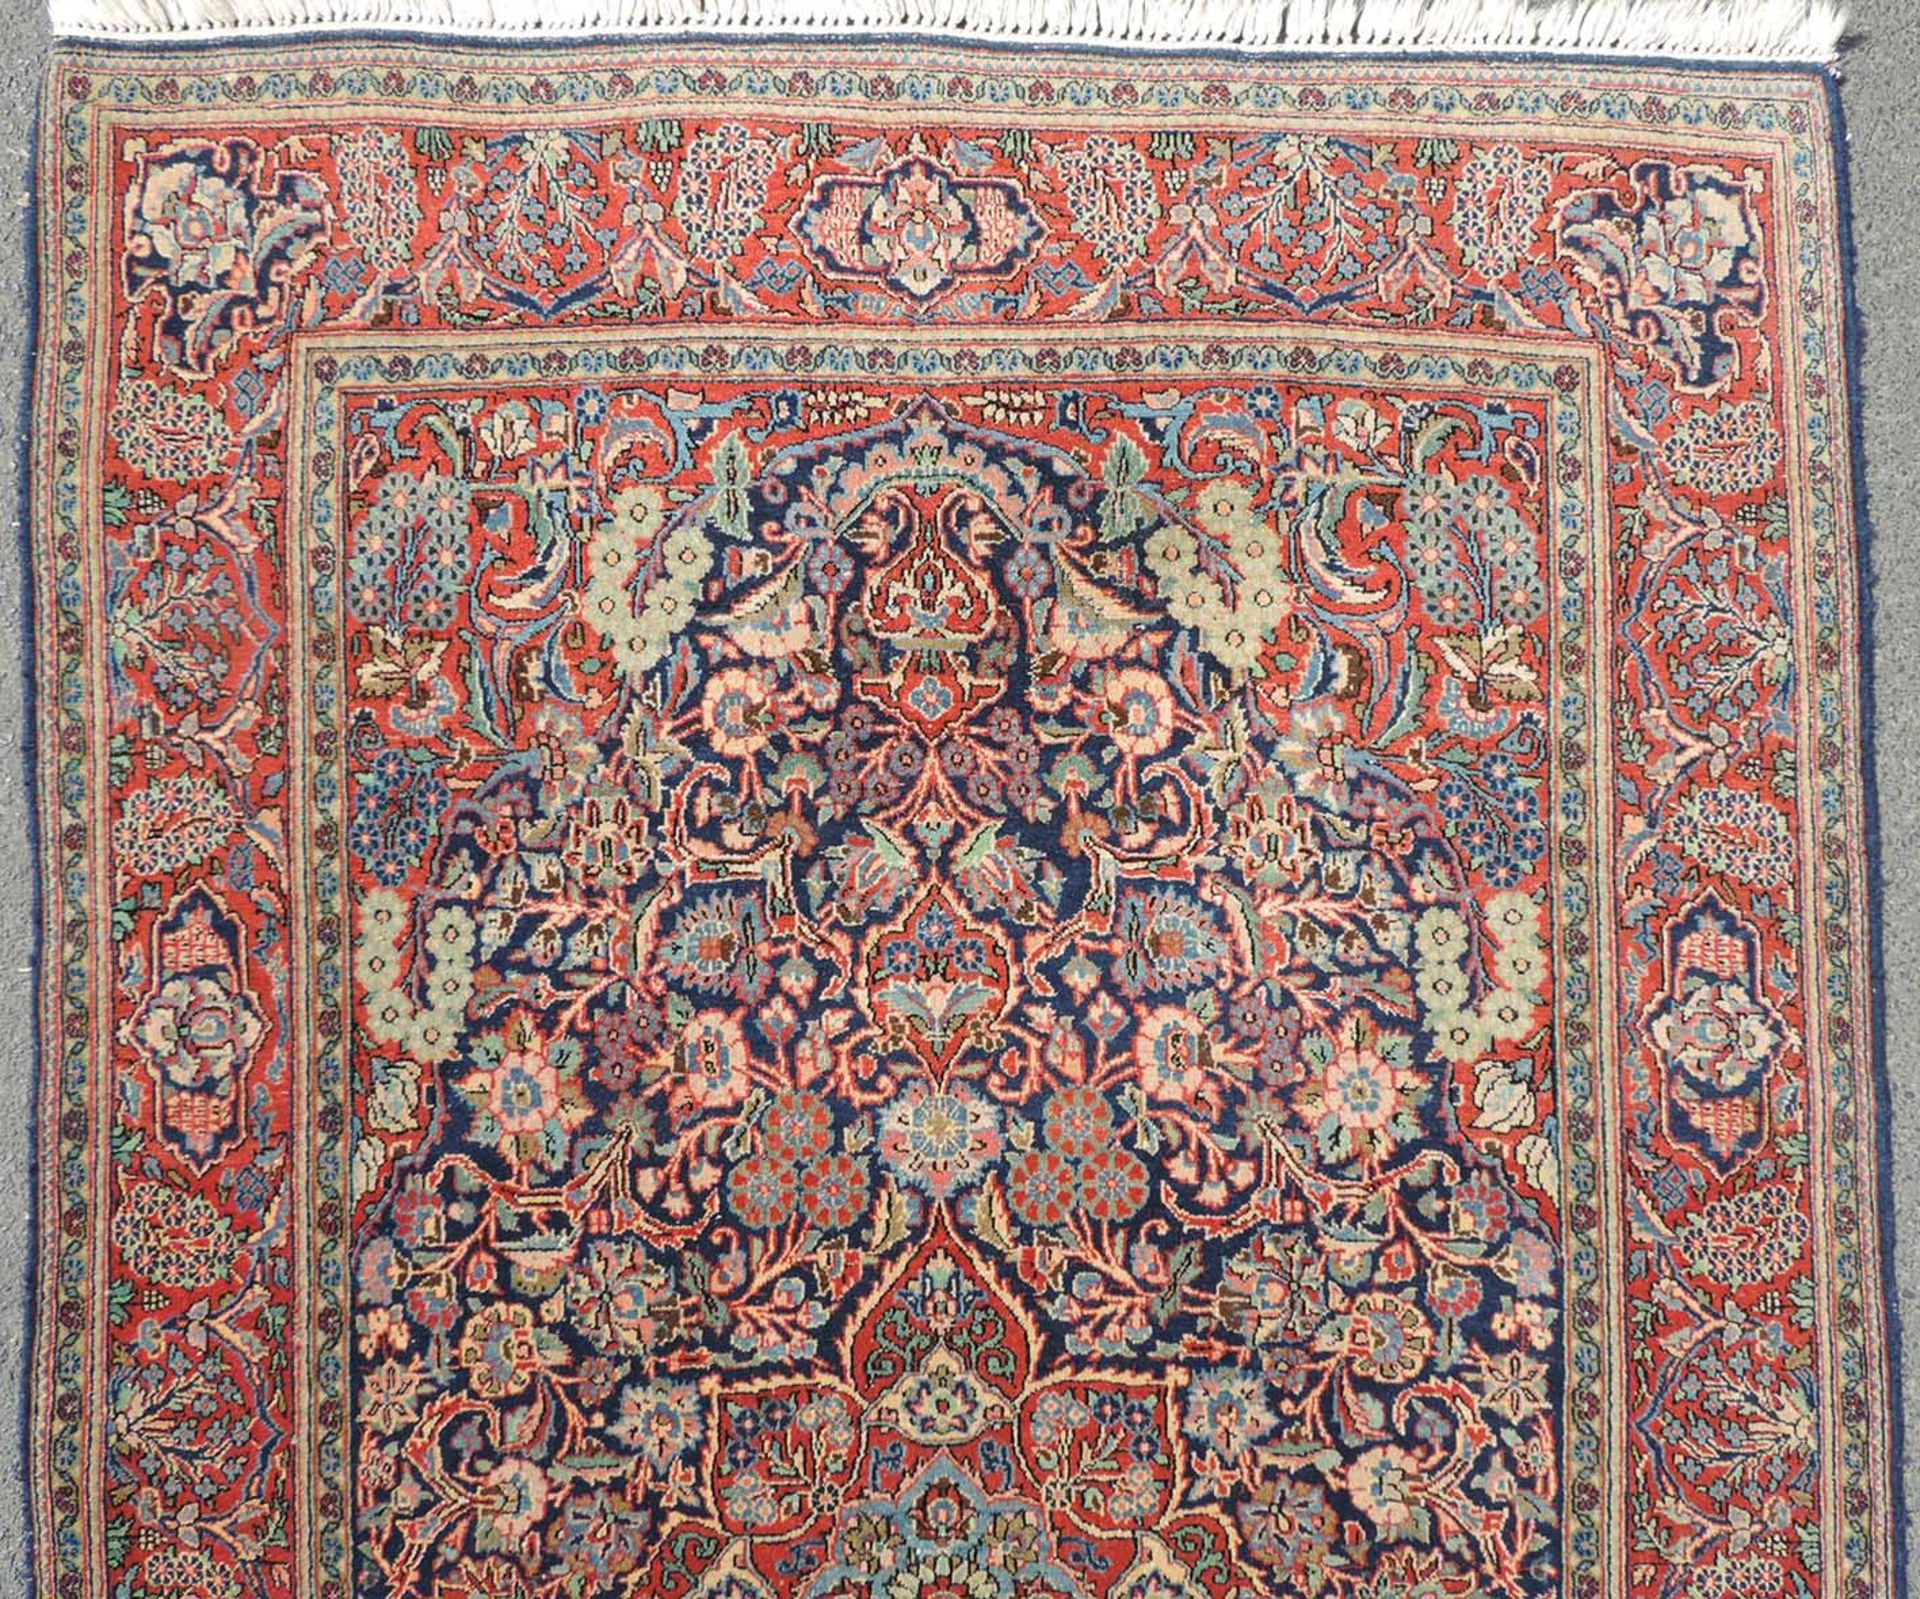 Keschan Persian rug. Iran. Old, circa 80 years. Fine weave.221 cm x 134 cm. Knotted by hand. Cork - Image 4 of 6